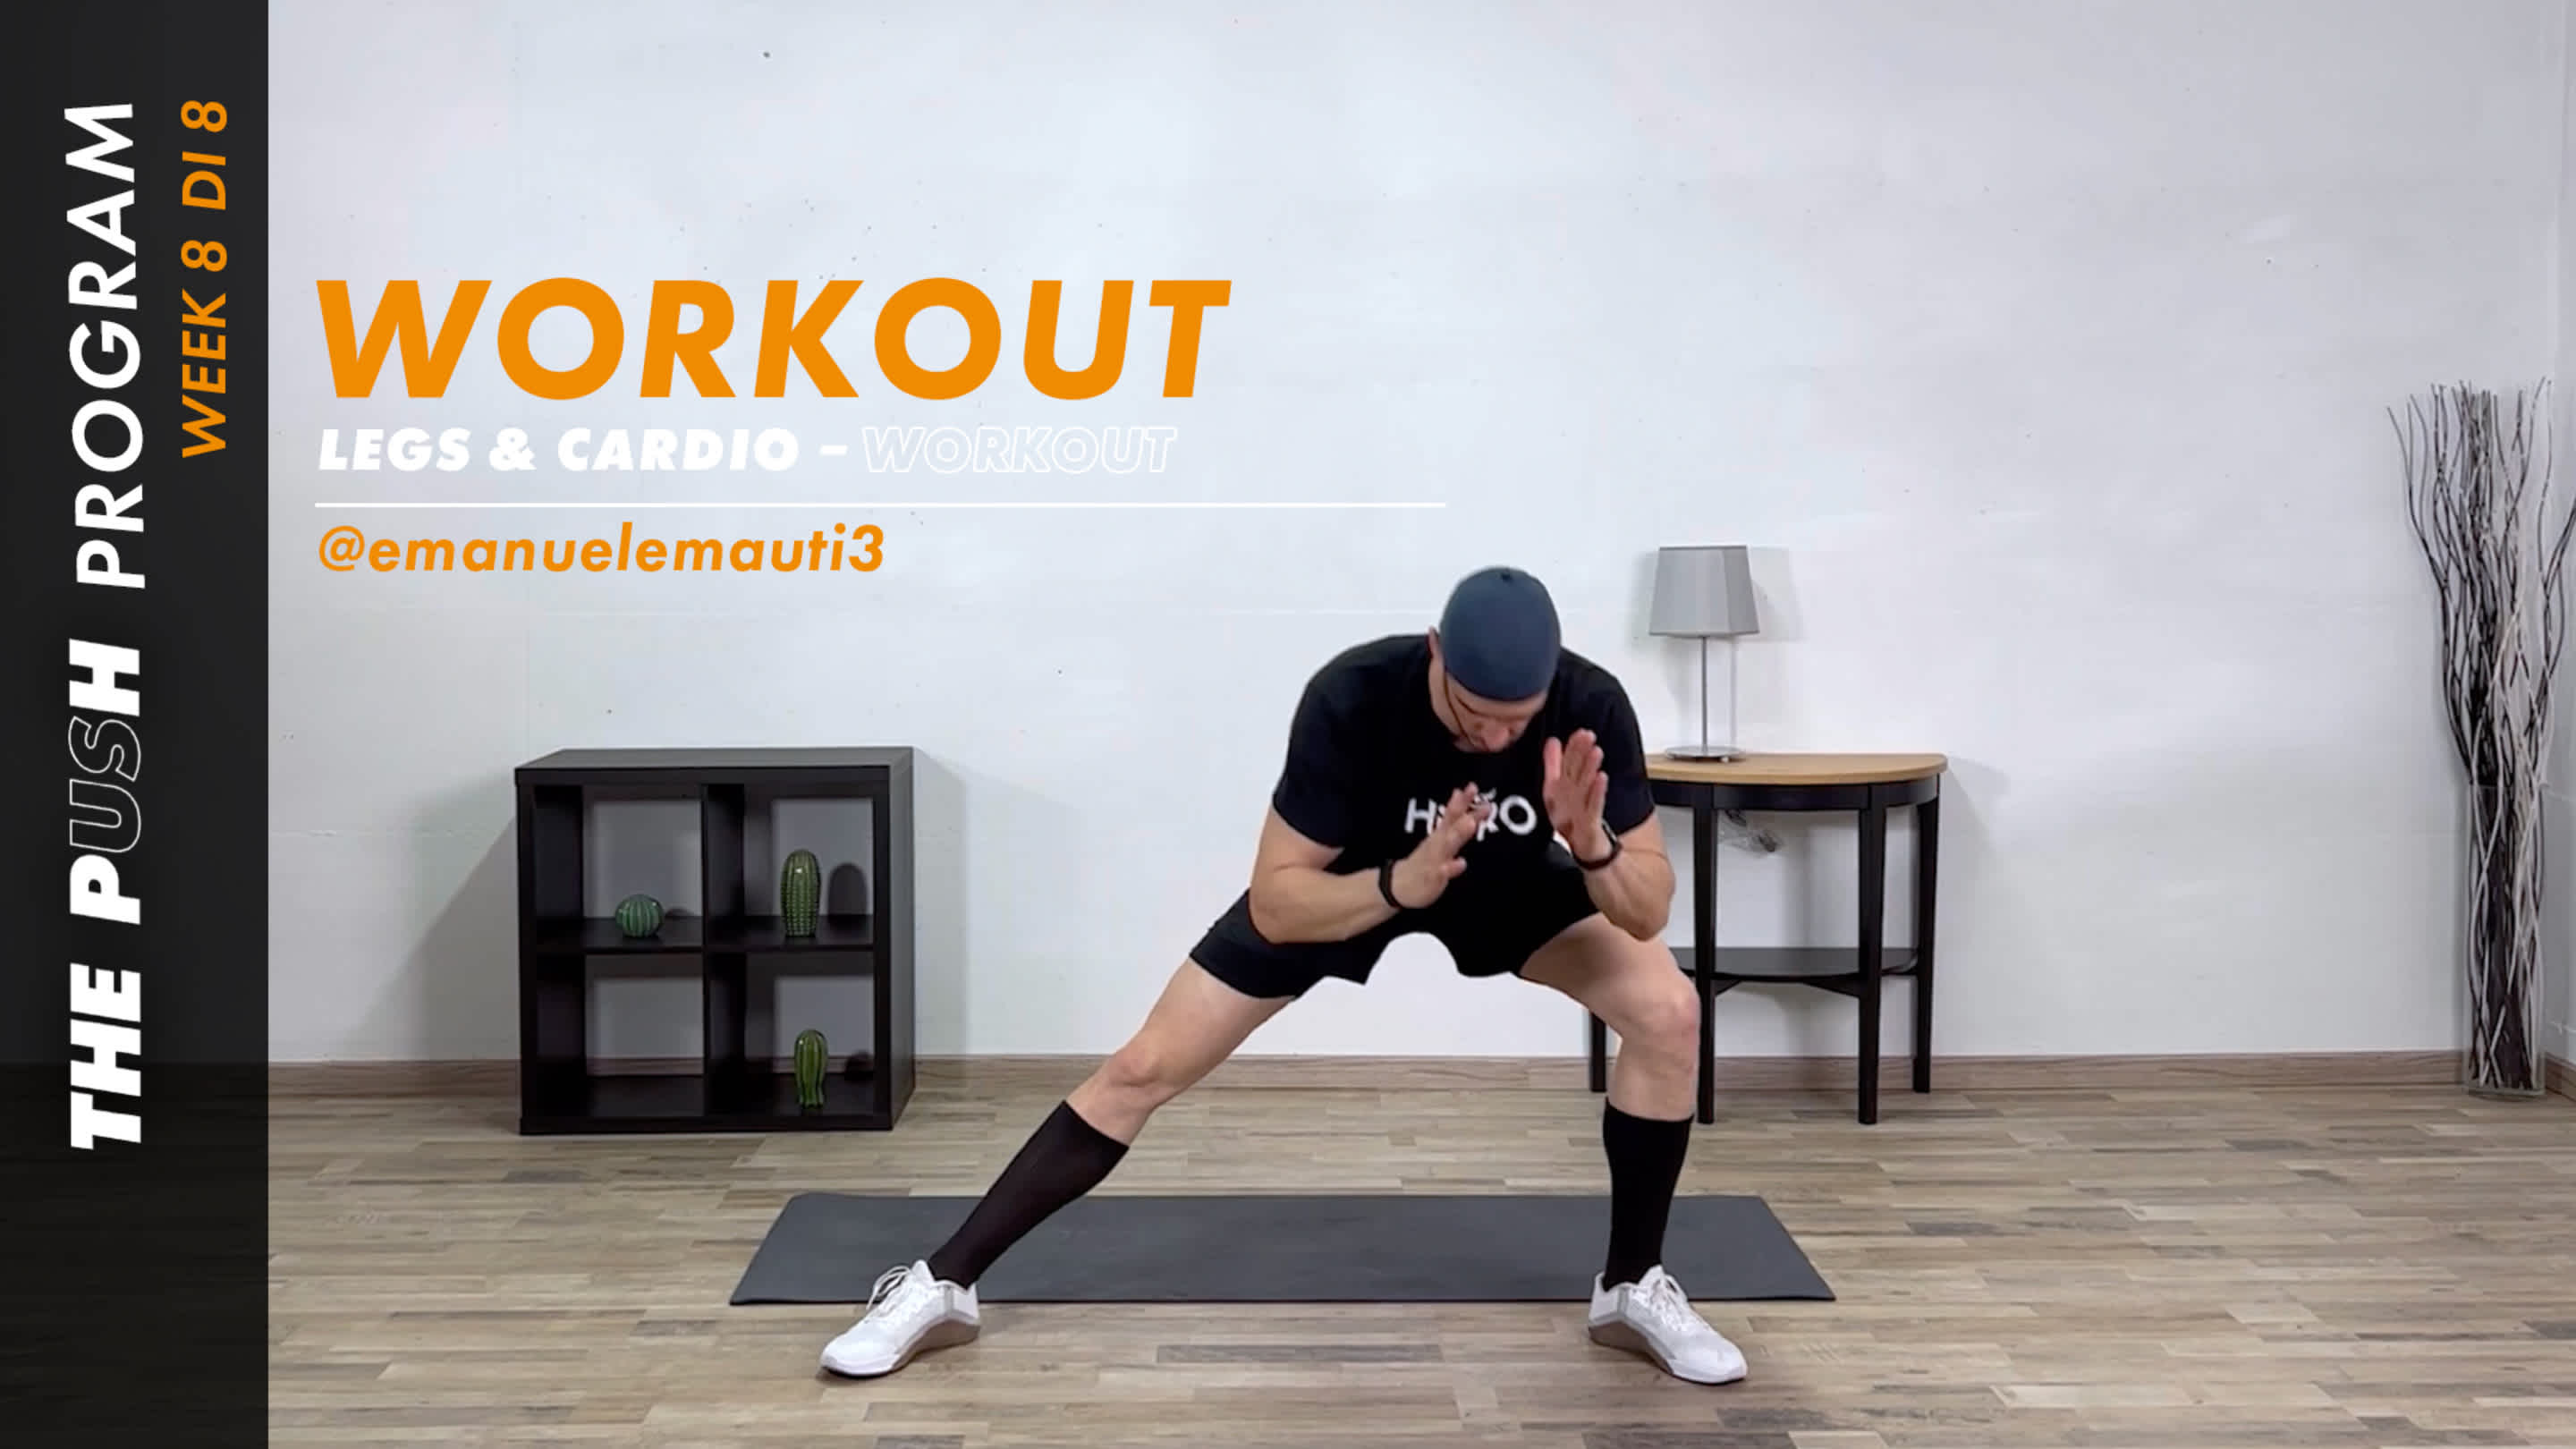 Killer Workout - Legs and cardio M